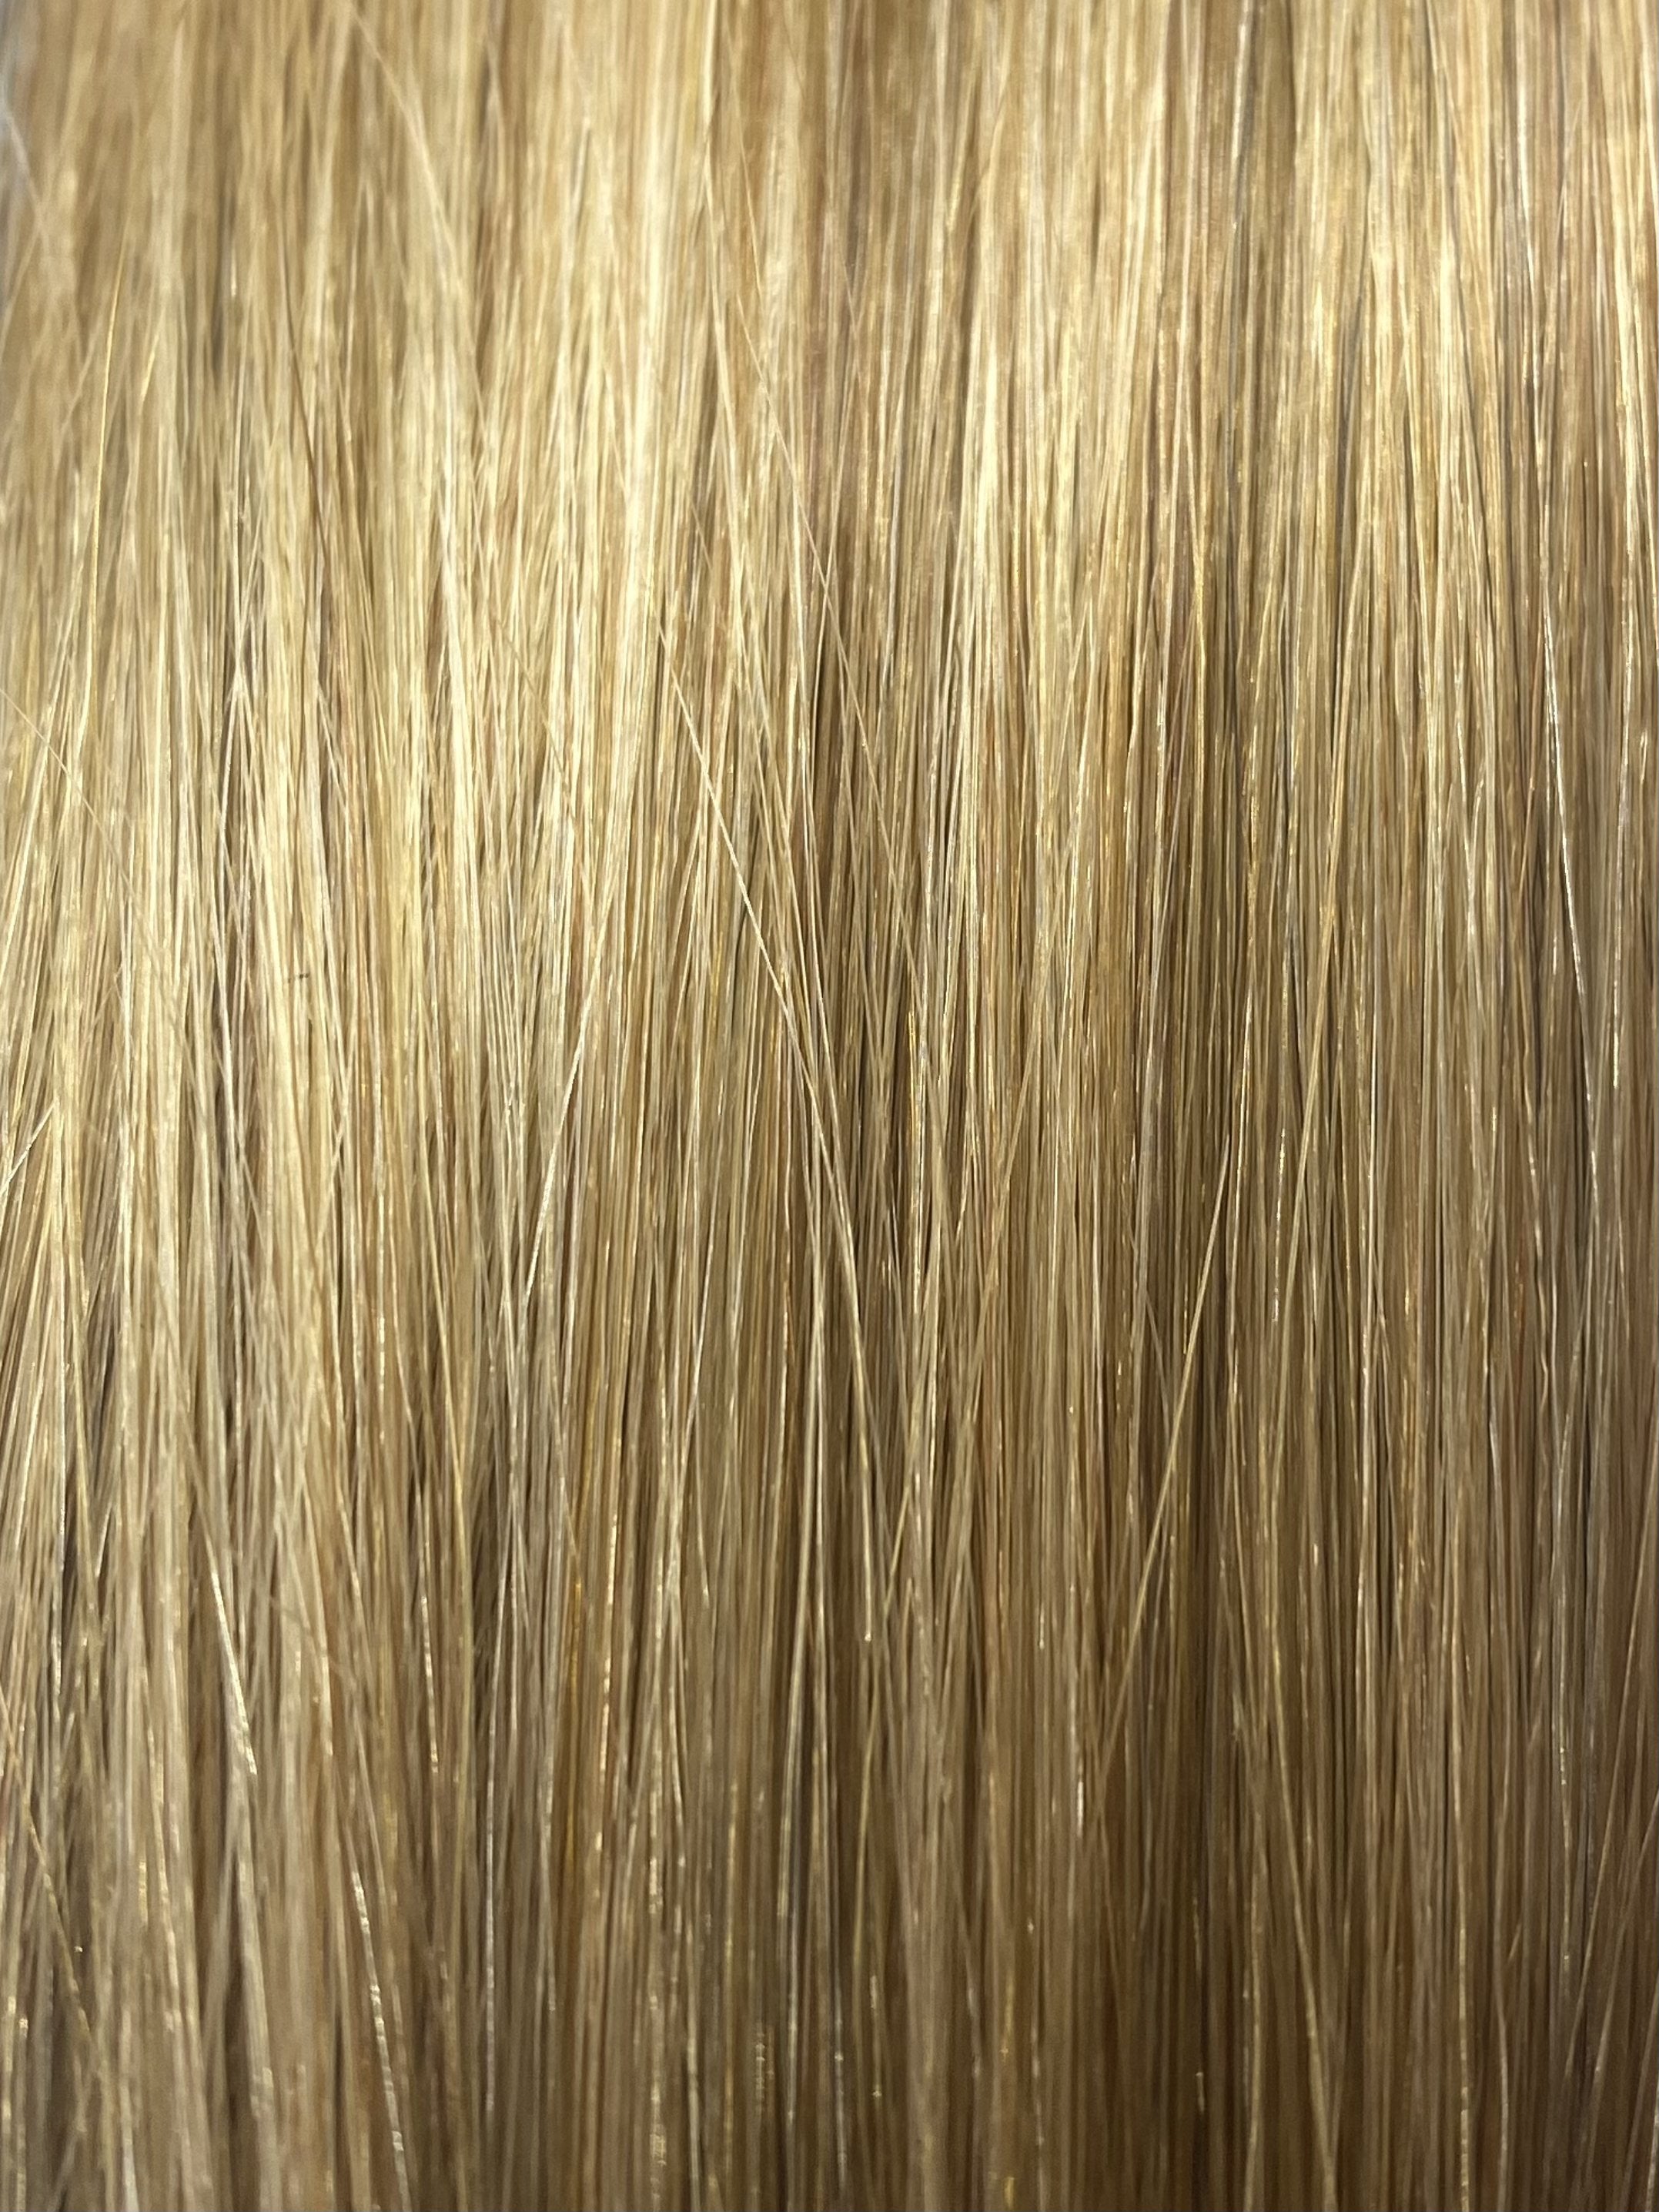 FUSION HIGHLIGHT #12/DB2 LIGHT/COPPER GOLDEN BLONDE 50CM/ 20 INCHES  -  20 GRAMS